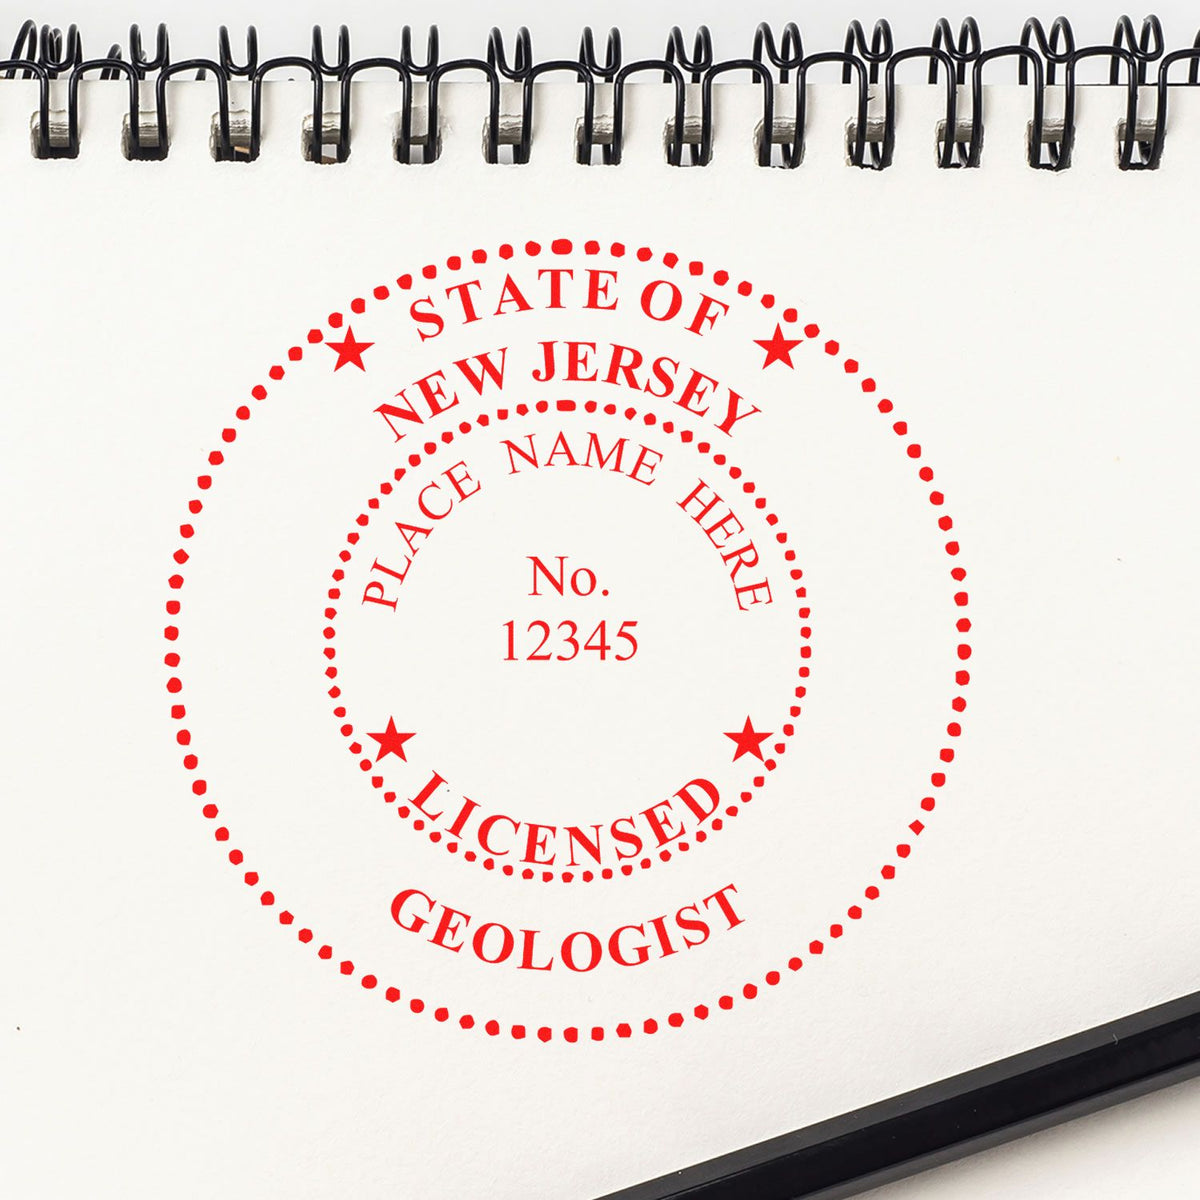 The Premium MaxLight Pre-Inked New Jersey Geology Stamp stamp impression comes to life with a crisp, detailed image stamped on paper - showcasing true professional quality.